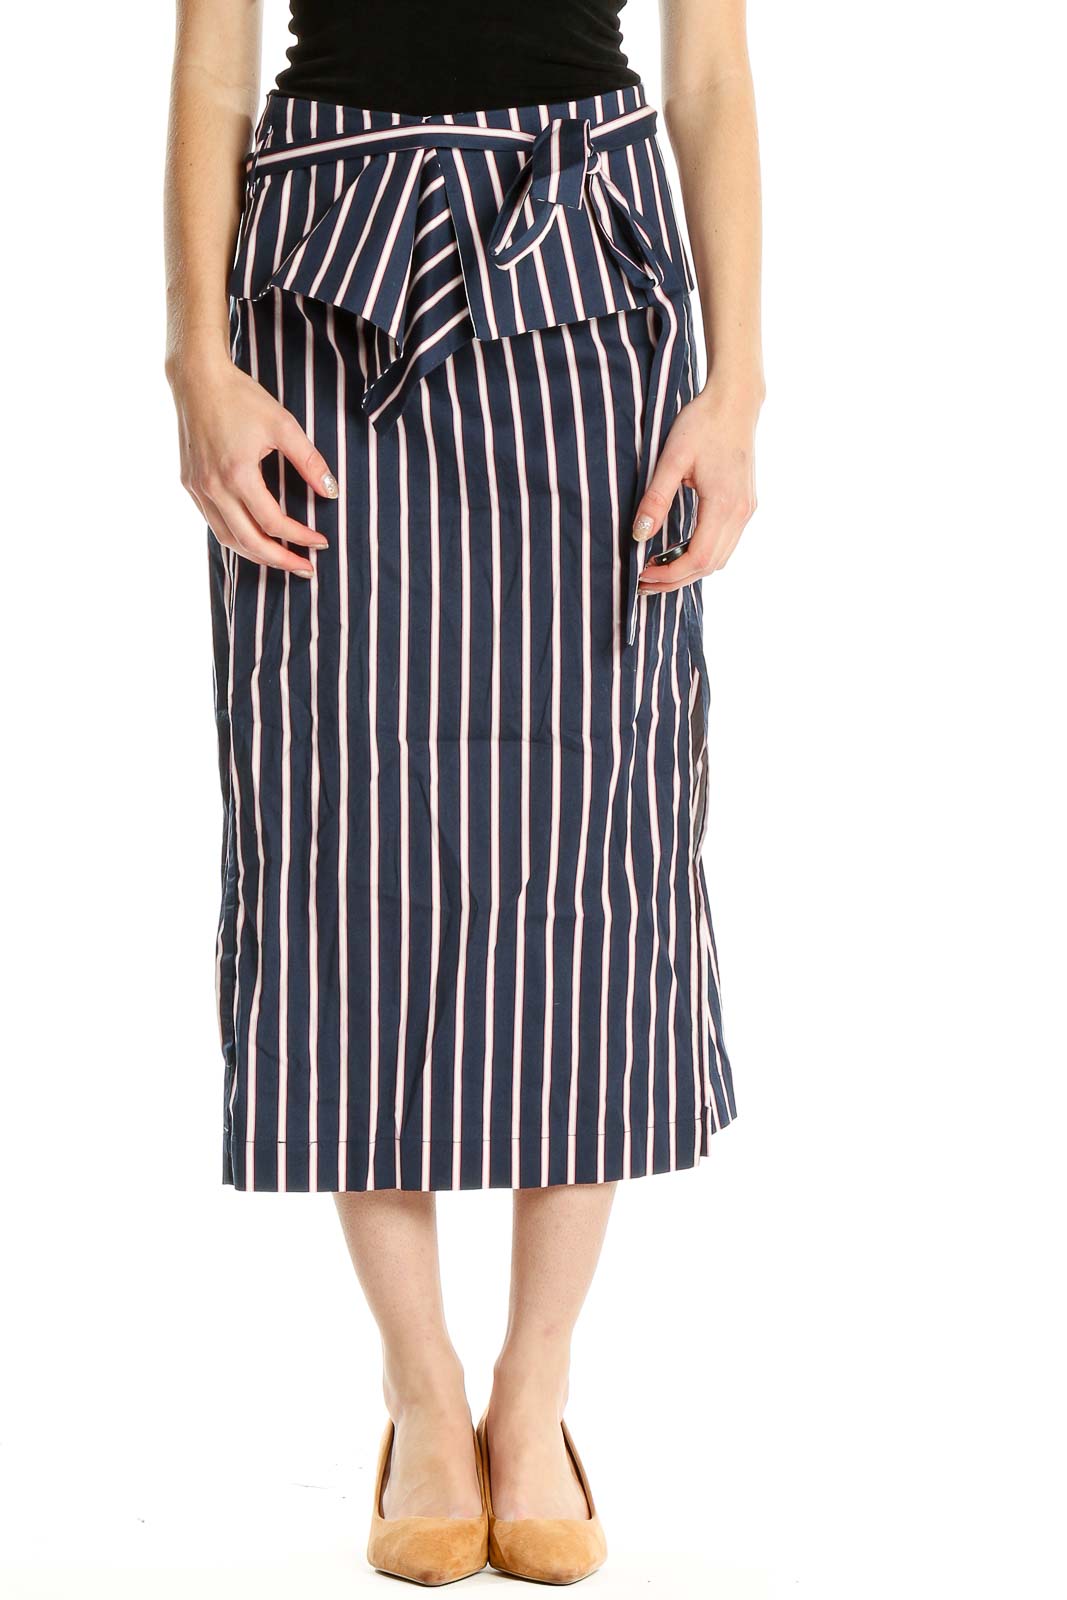 Blue Striped Chic Straight Skirt Front